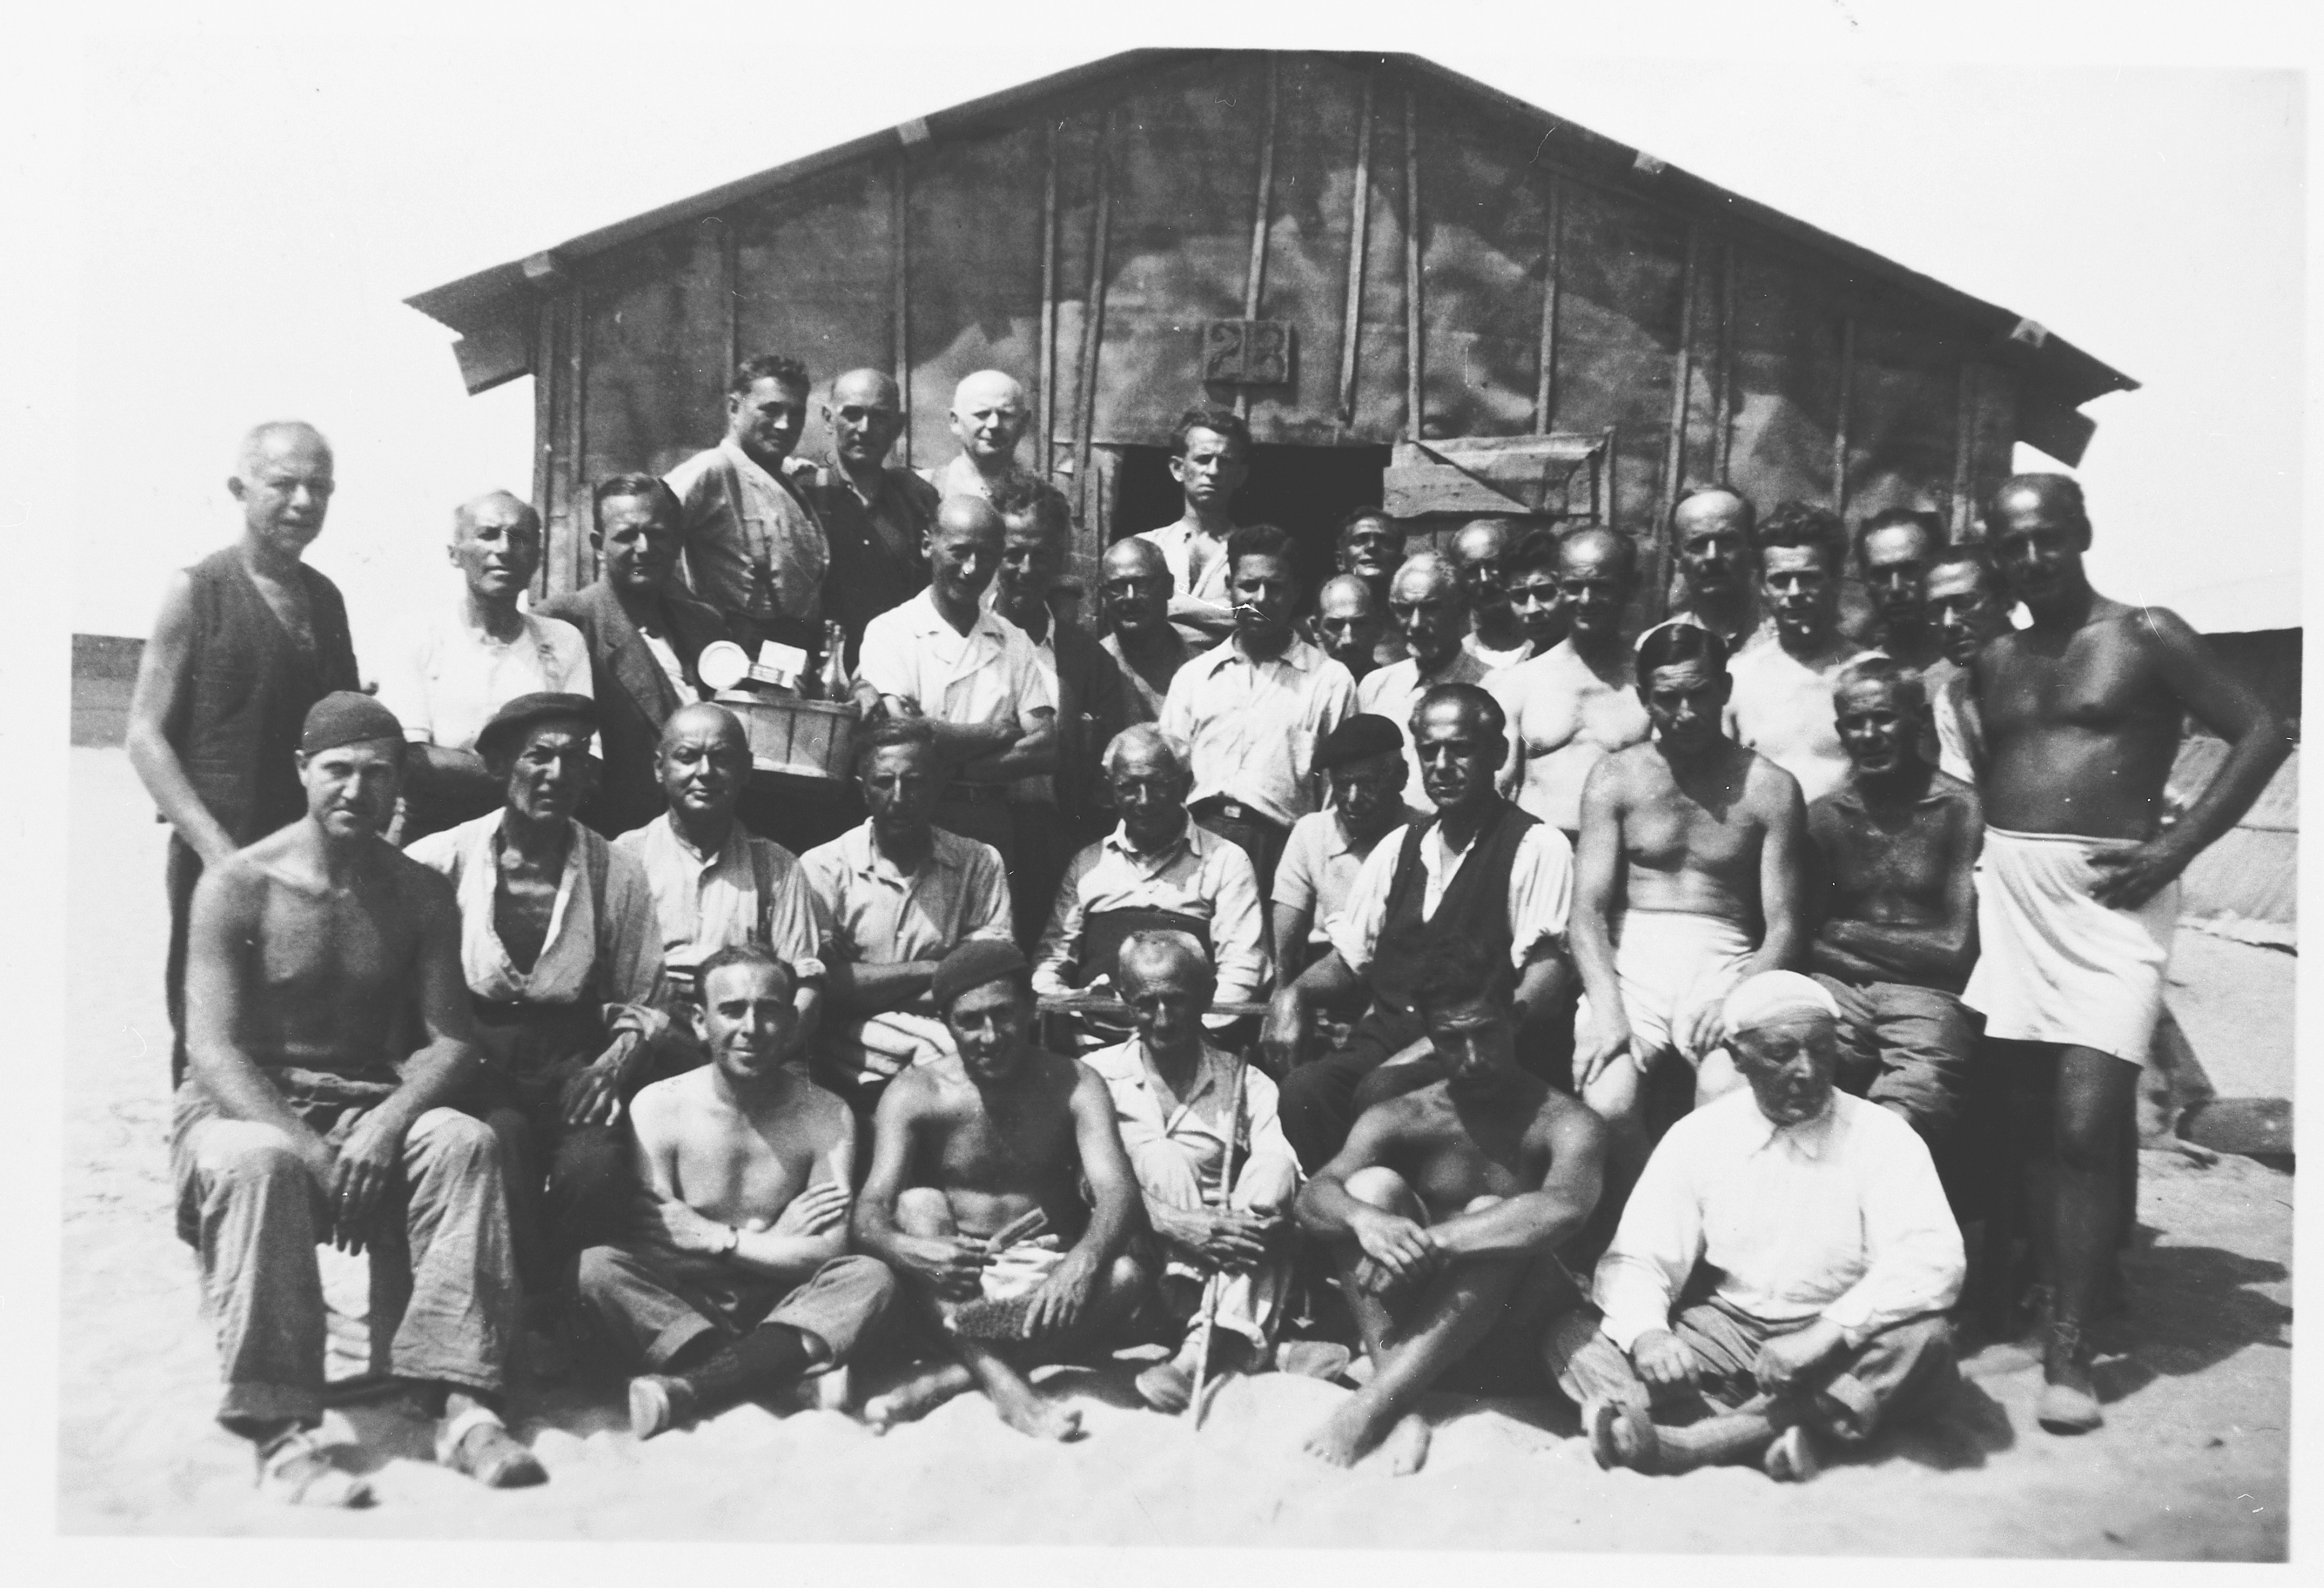 Prisoners pose in front of a barrack